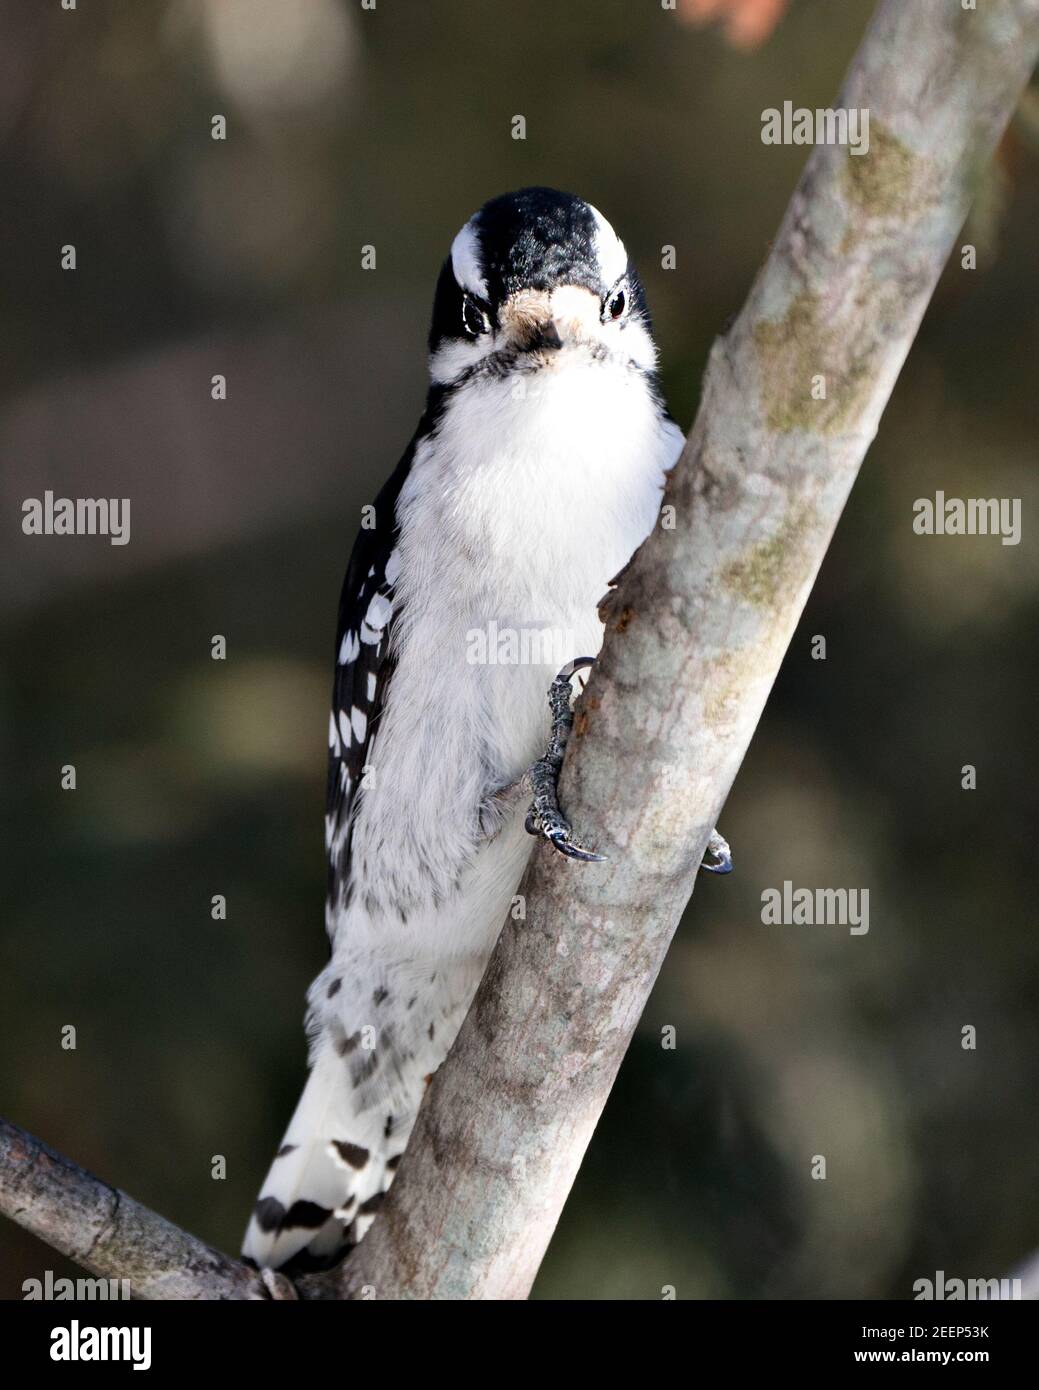 Woodpecker close-up profile view perched looking at camera and displaying feather plumage in its environment and habitat in the forest. Image. Stock Photo